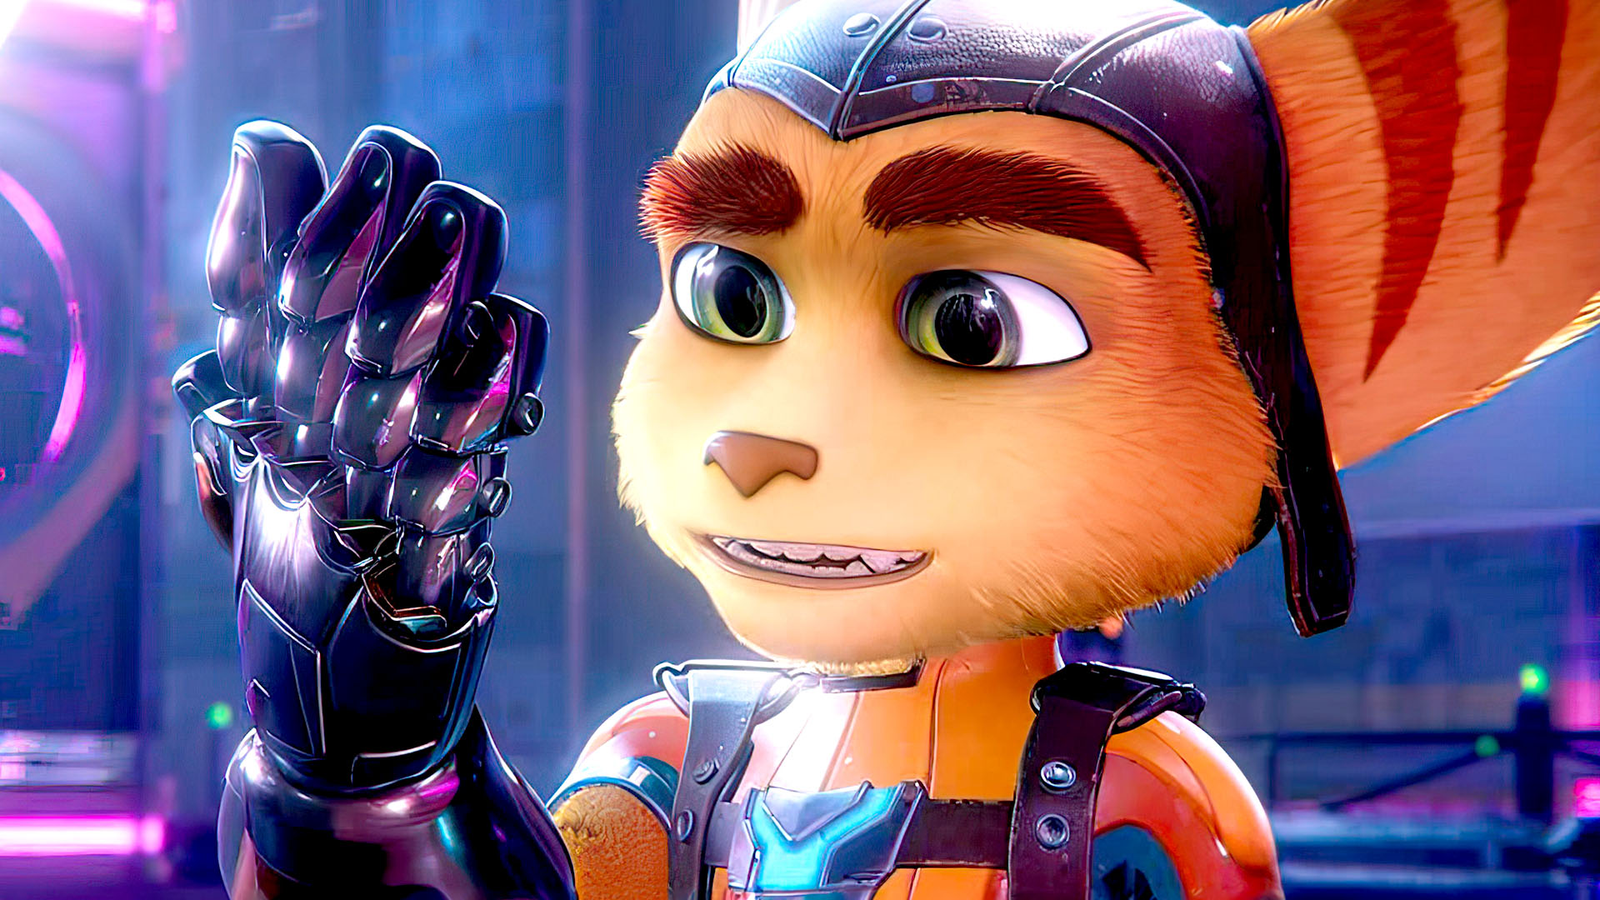 Ratchet and Clank: Rift Apart's PC Port Struggles to Run on a PS4